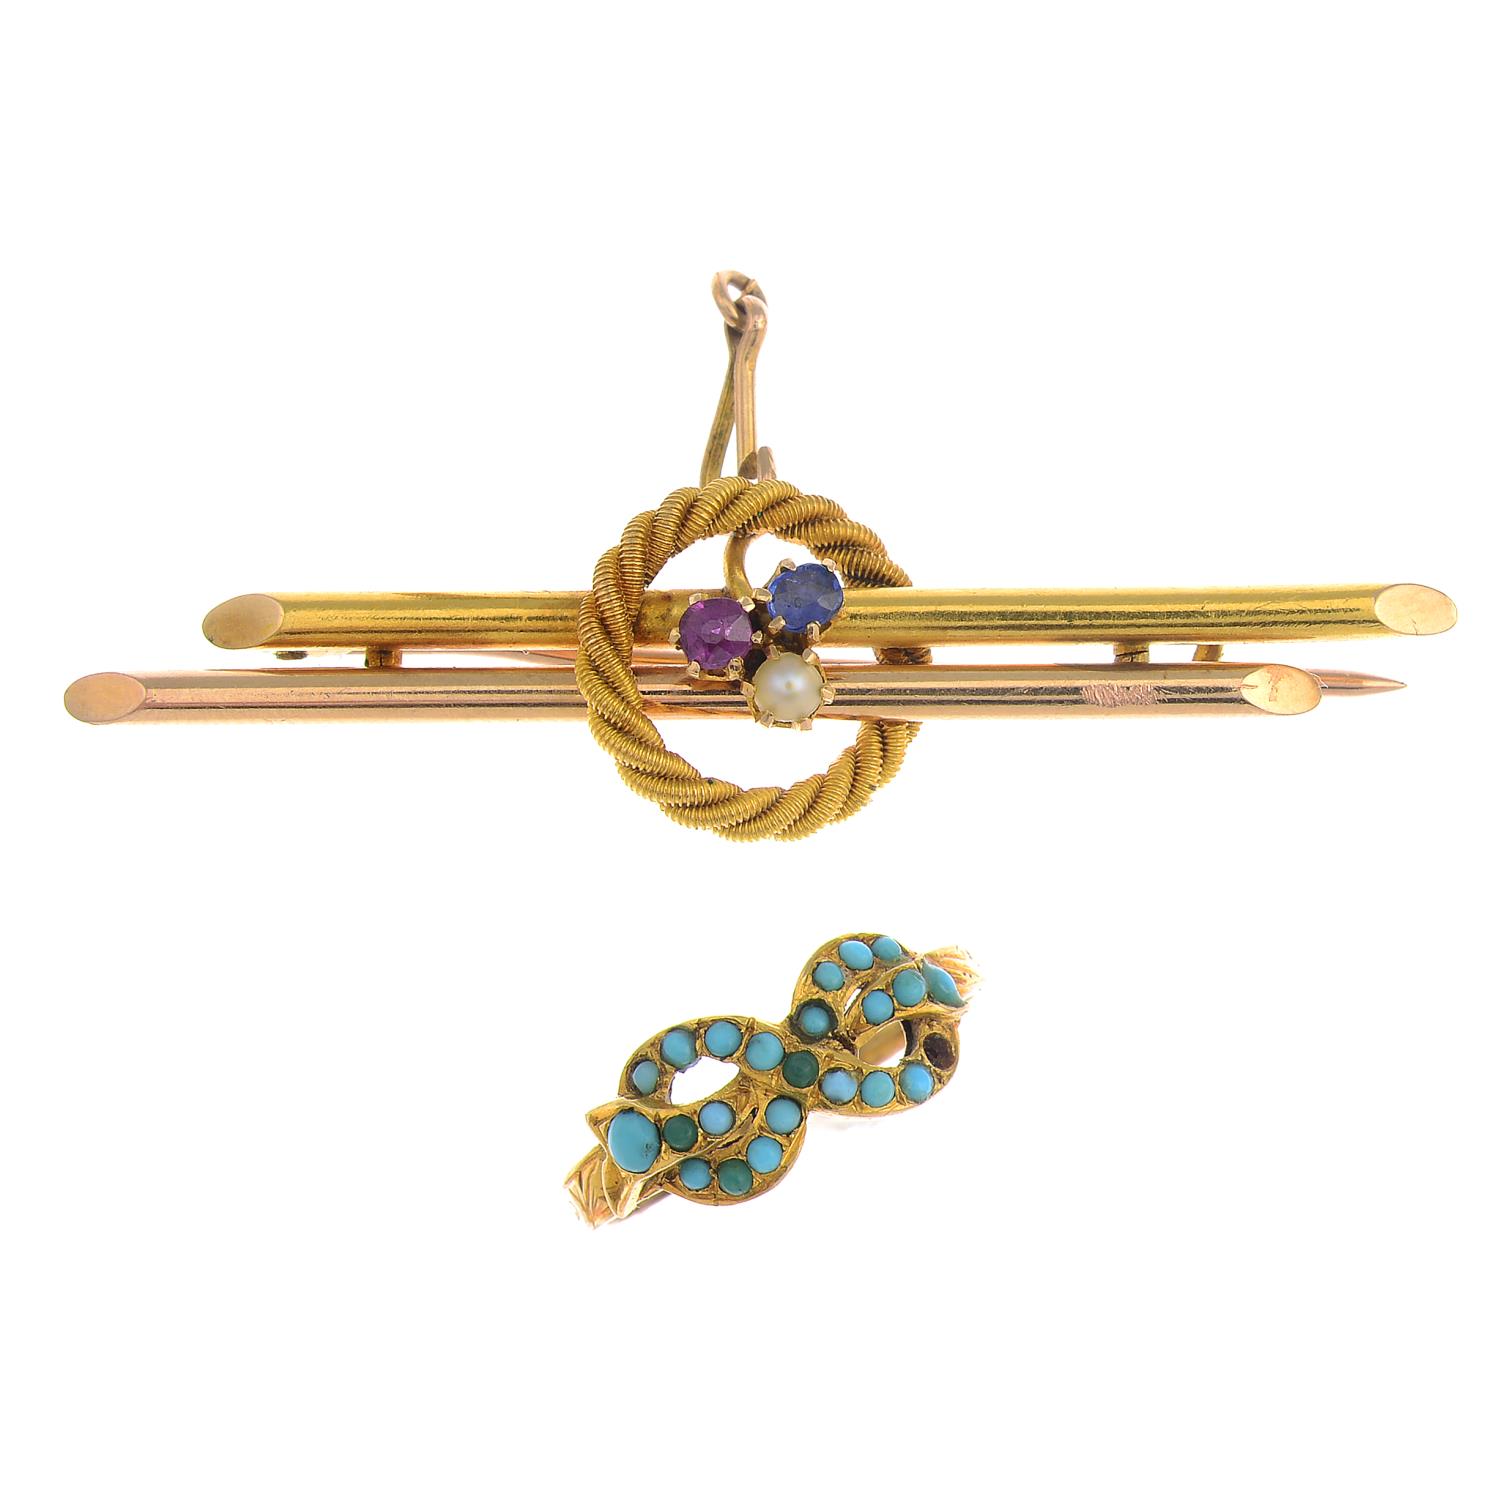 A mid 19th century gold turquoise ring and an early 20th century gold gem-set brooch.